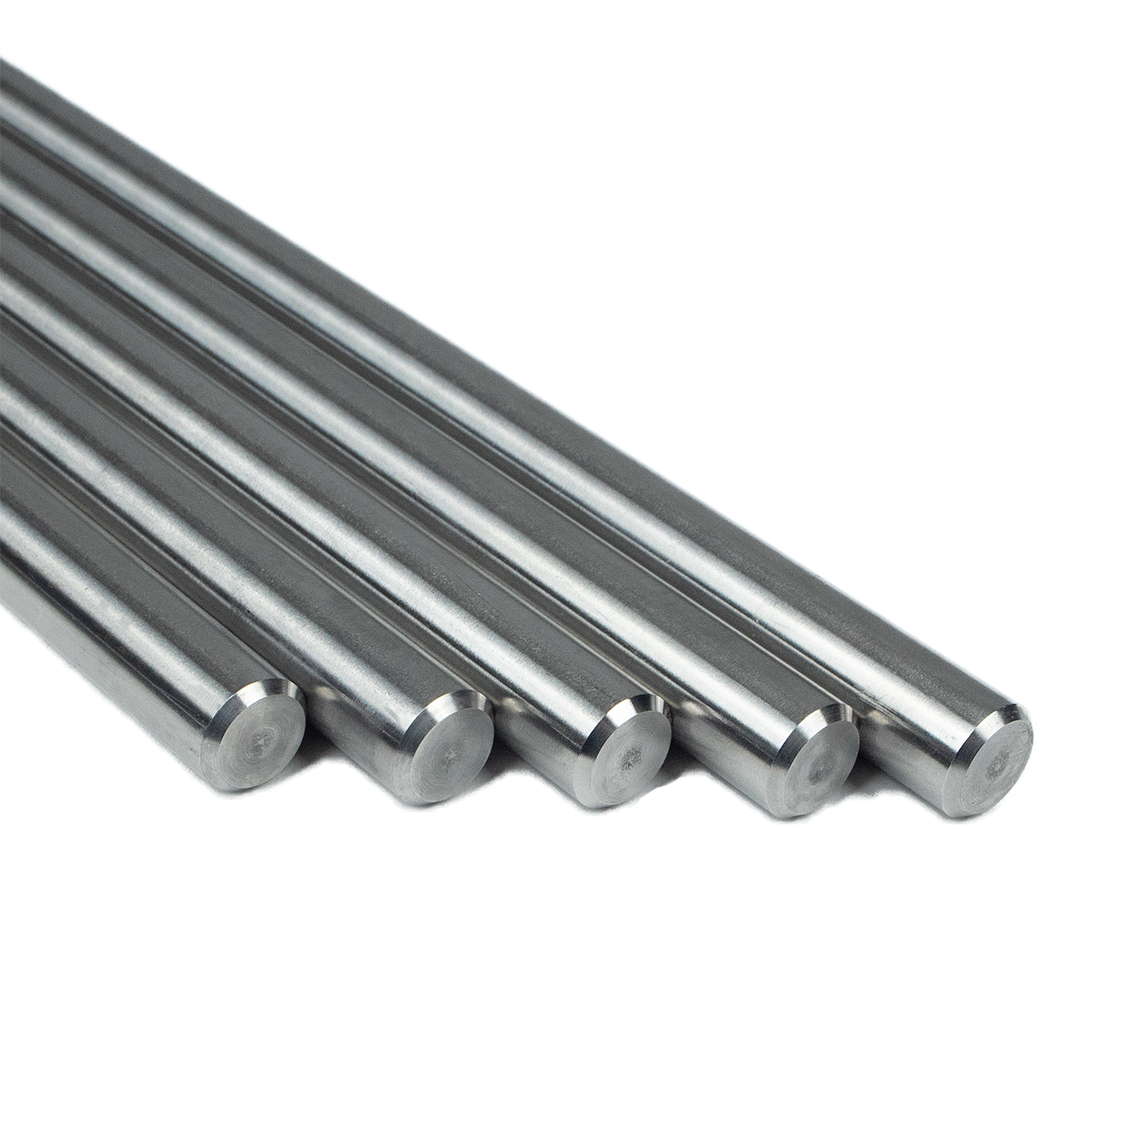 Stand Rod - Ø 12 mm, length 750 mm - stainless steel